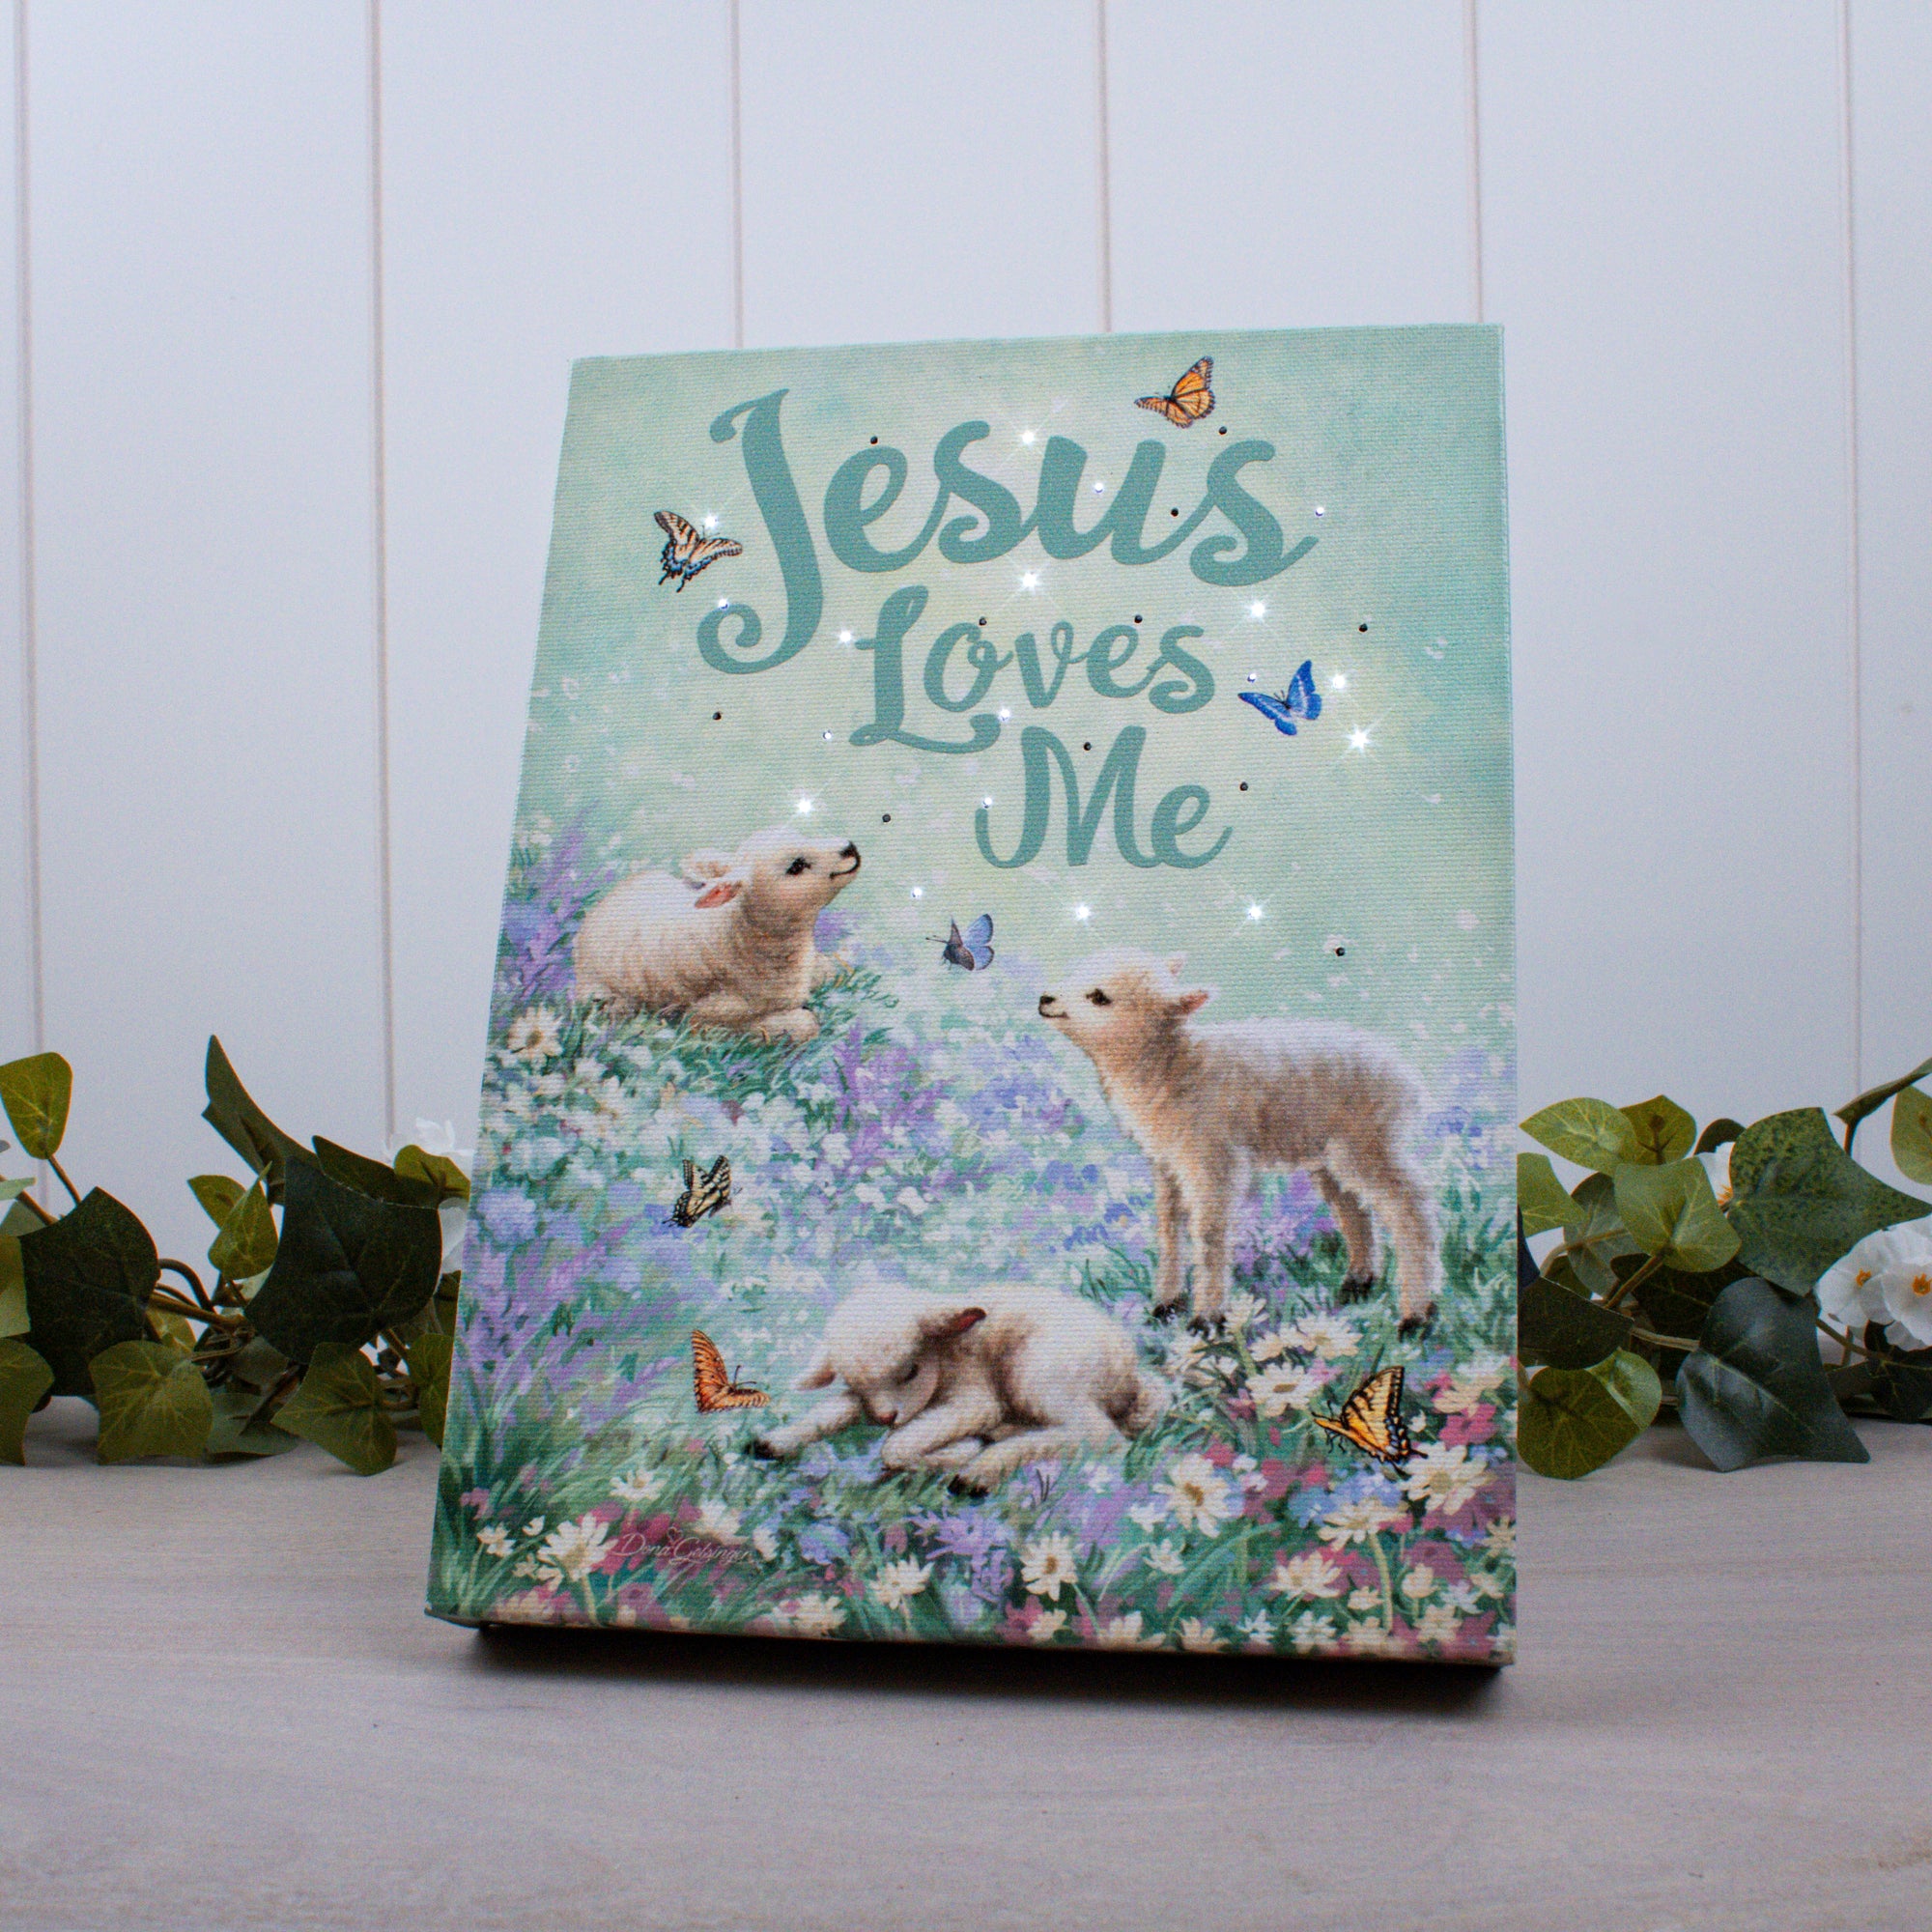 Jesus Loves Me 8x6 Lighted Tabletop Canvas